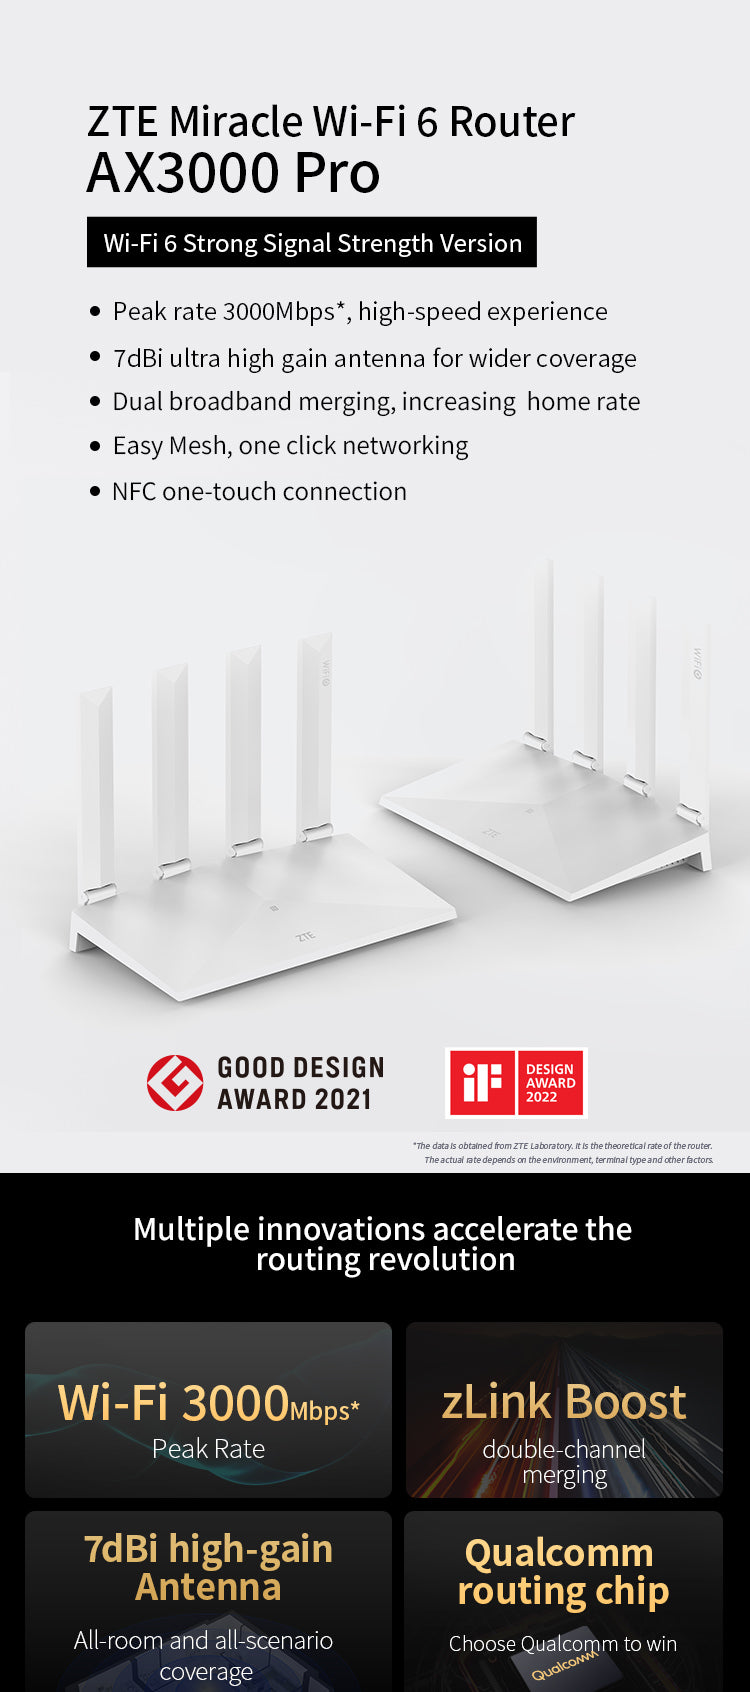 ZTE Ax3000 Pro WiFi 6 Router – Dual Band Router for Wireless Internet,  Speed up to 3 Gbps, Supports Guest WiFi, Parental Controls, QoS, NFC